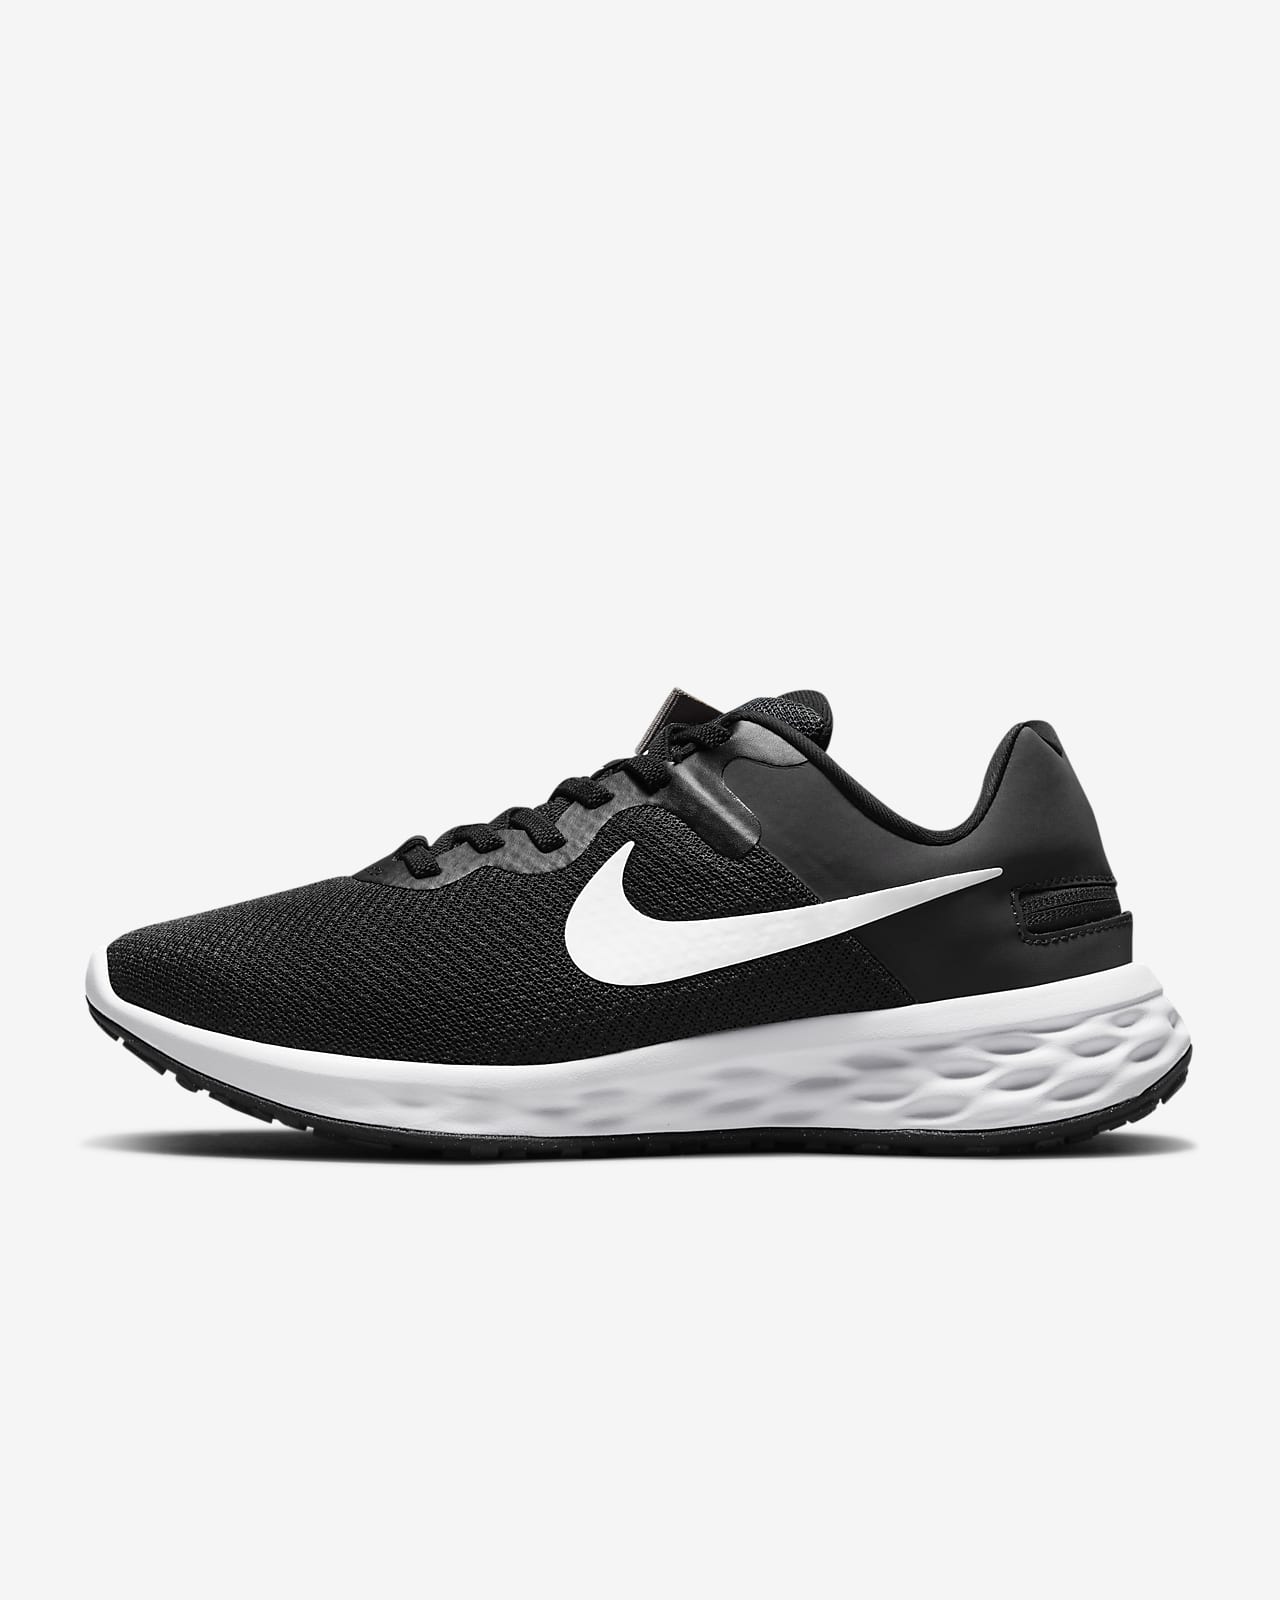 Nike Revolution 6 FlyEase Women\'s LU Nike Running Shoes. Easy On/Off Road